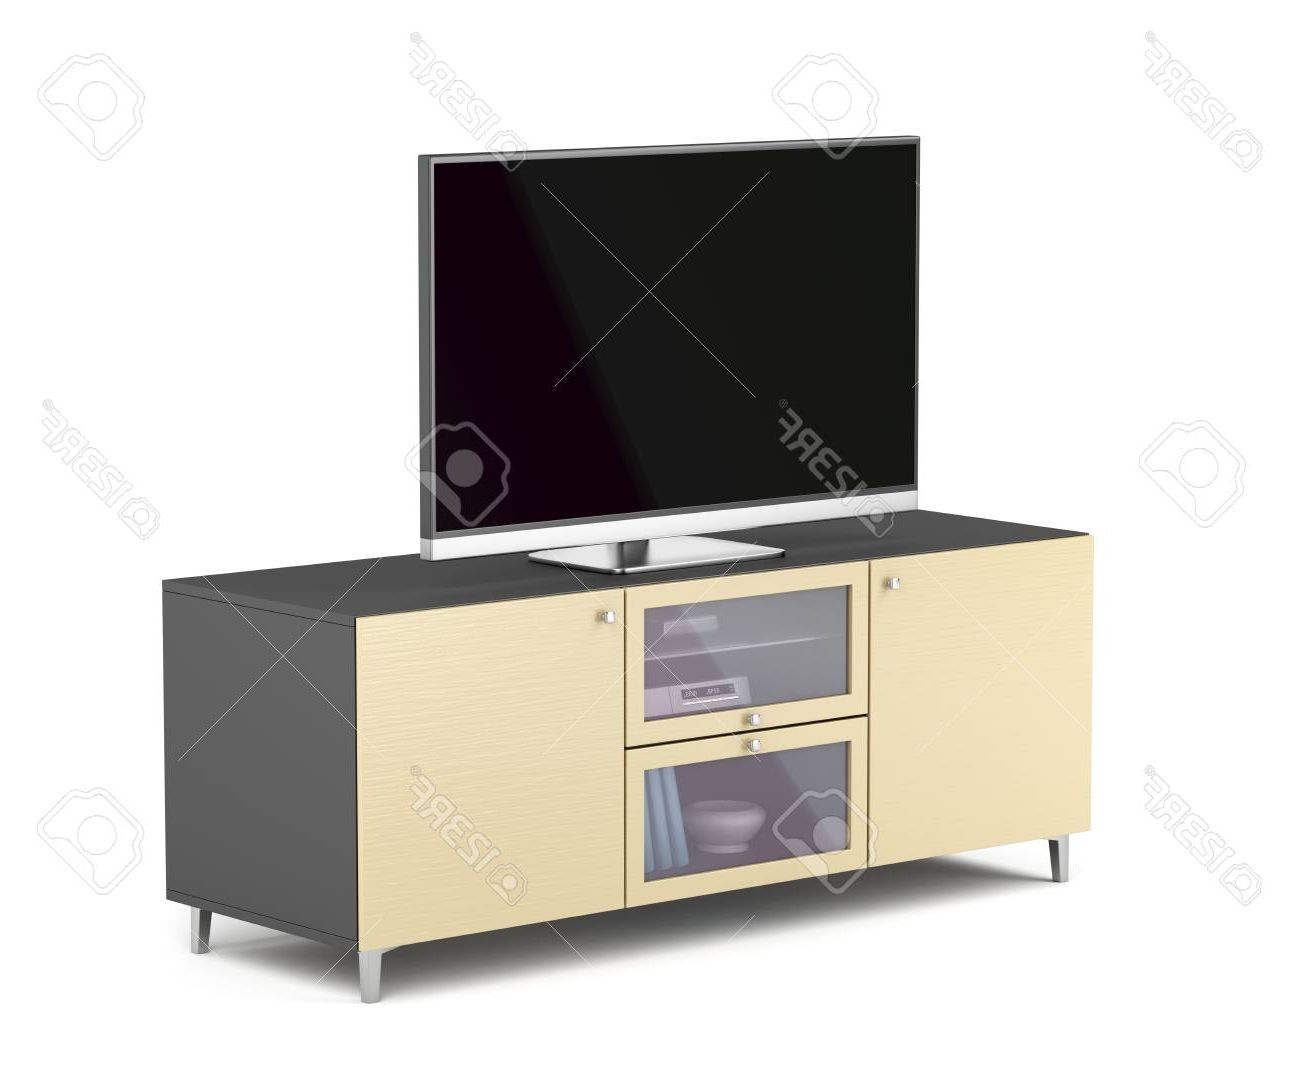 Flat Screen Tv On Modern Tv Stand, 3d Illustration Stock Photo Pertaining To Fashionable Modern Tv Stands For Flat Screens (Photo 18 of 20)